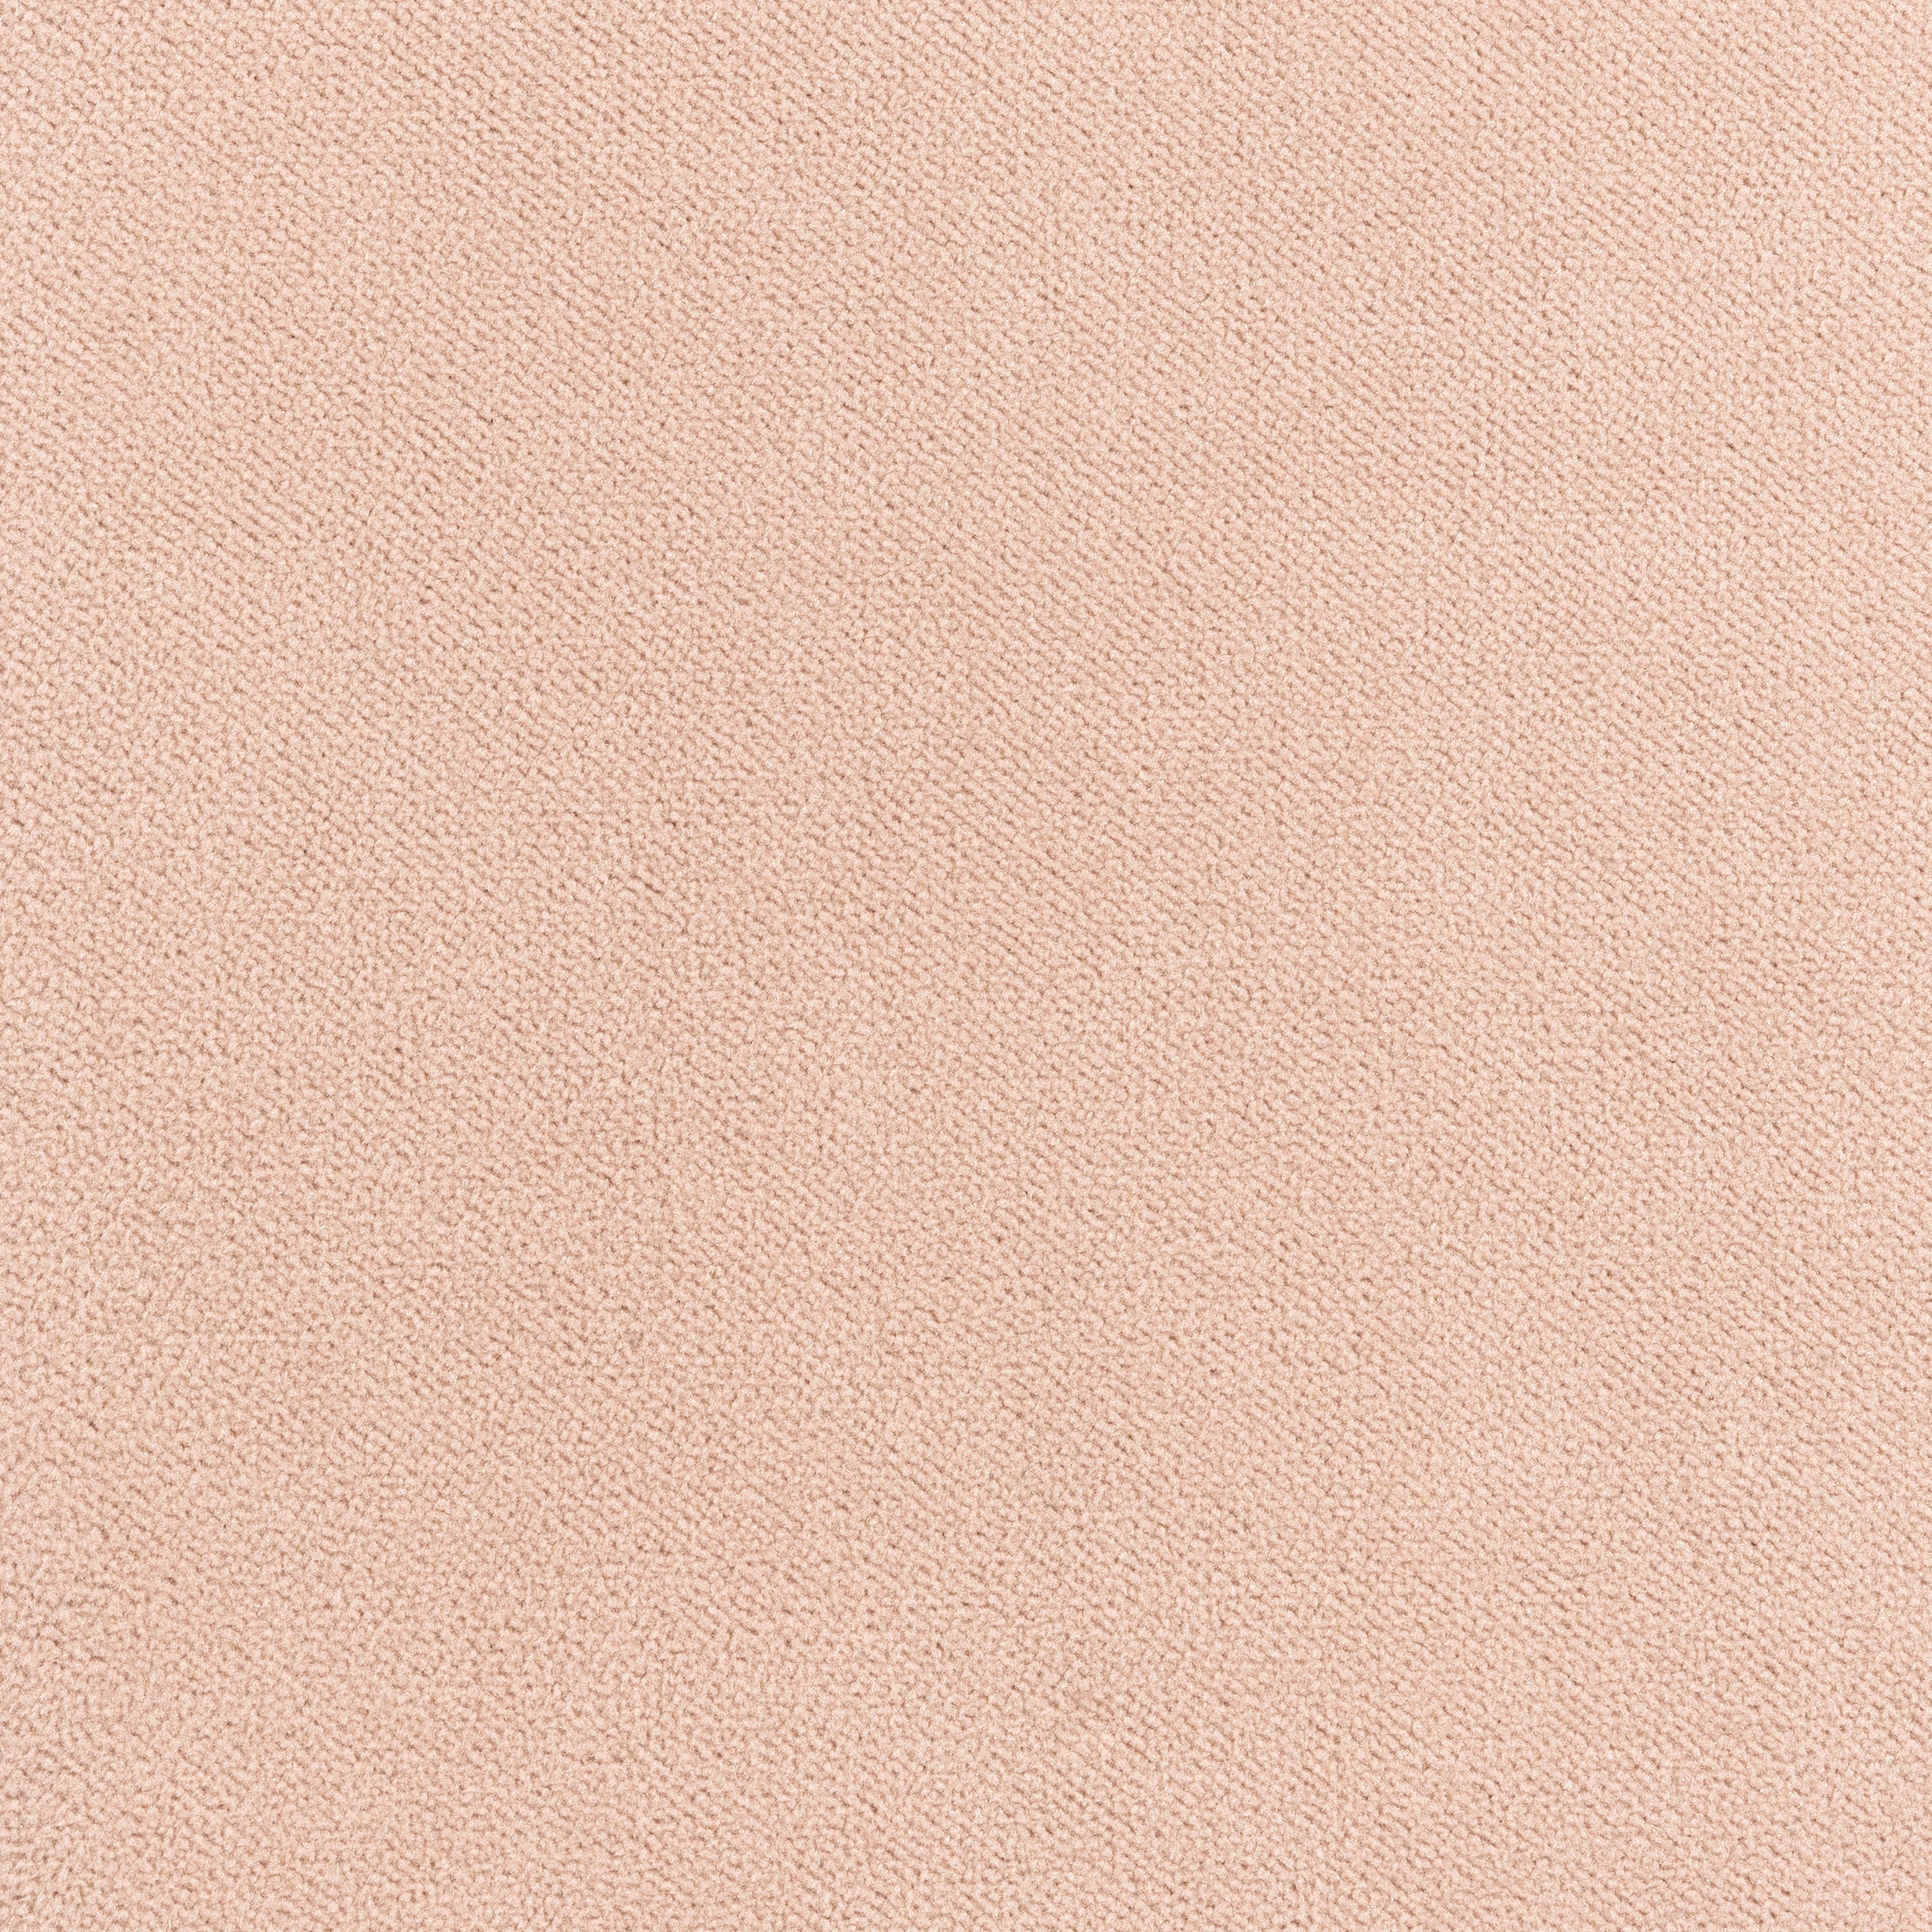 Club Velvet fabric in blush color - pattern number W7205 - by Thibaut in the Club Velvet collection